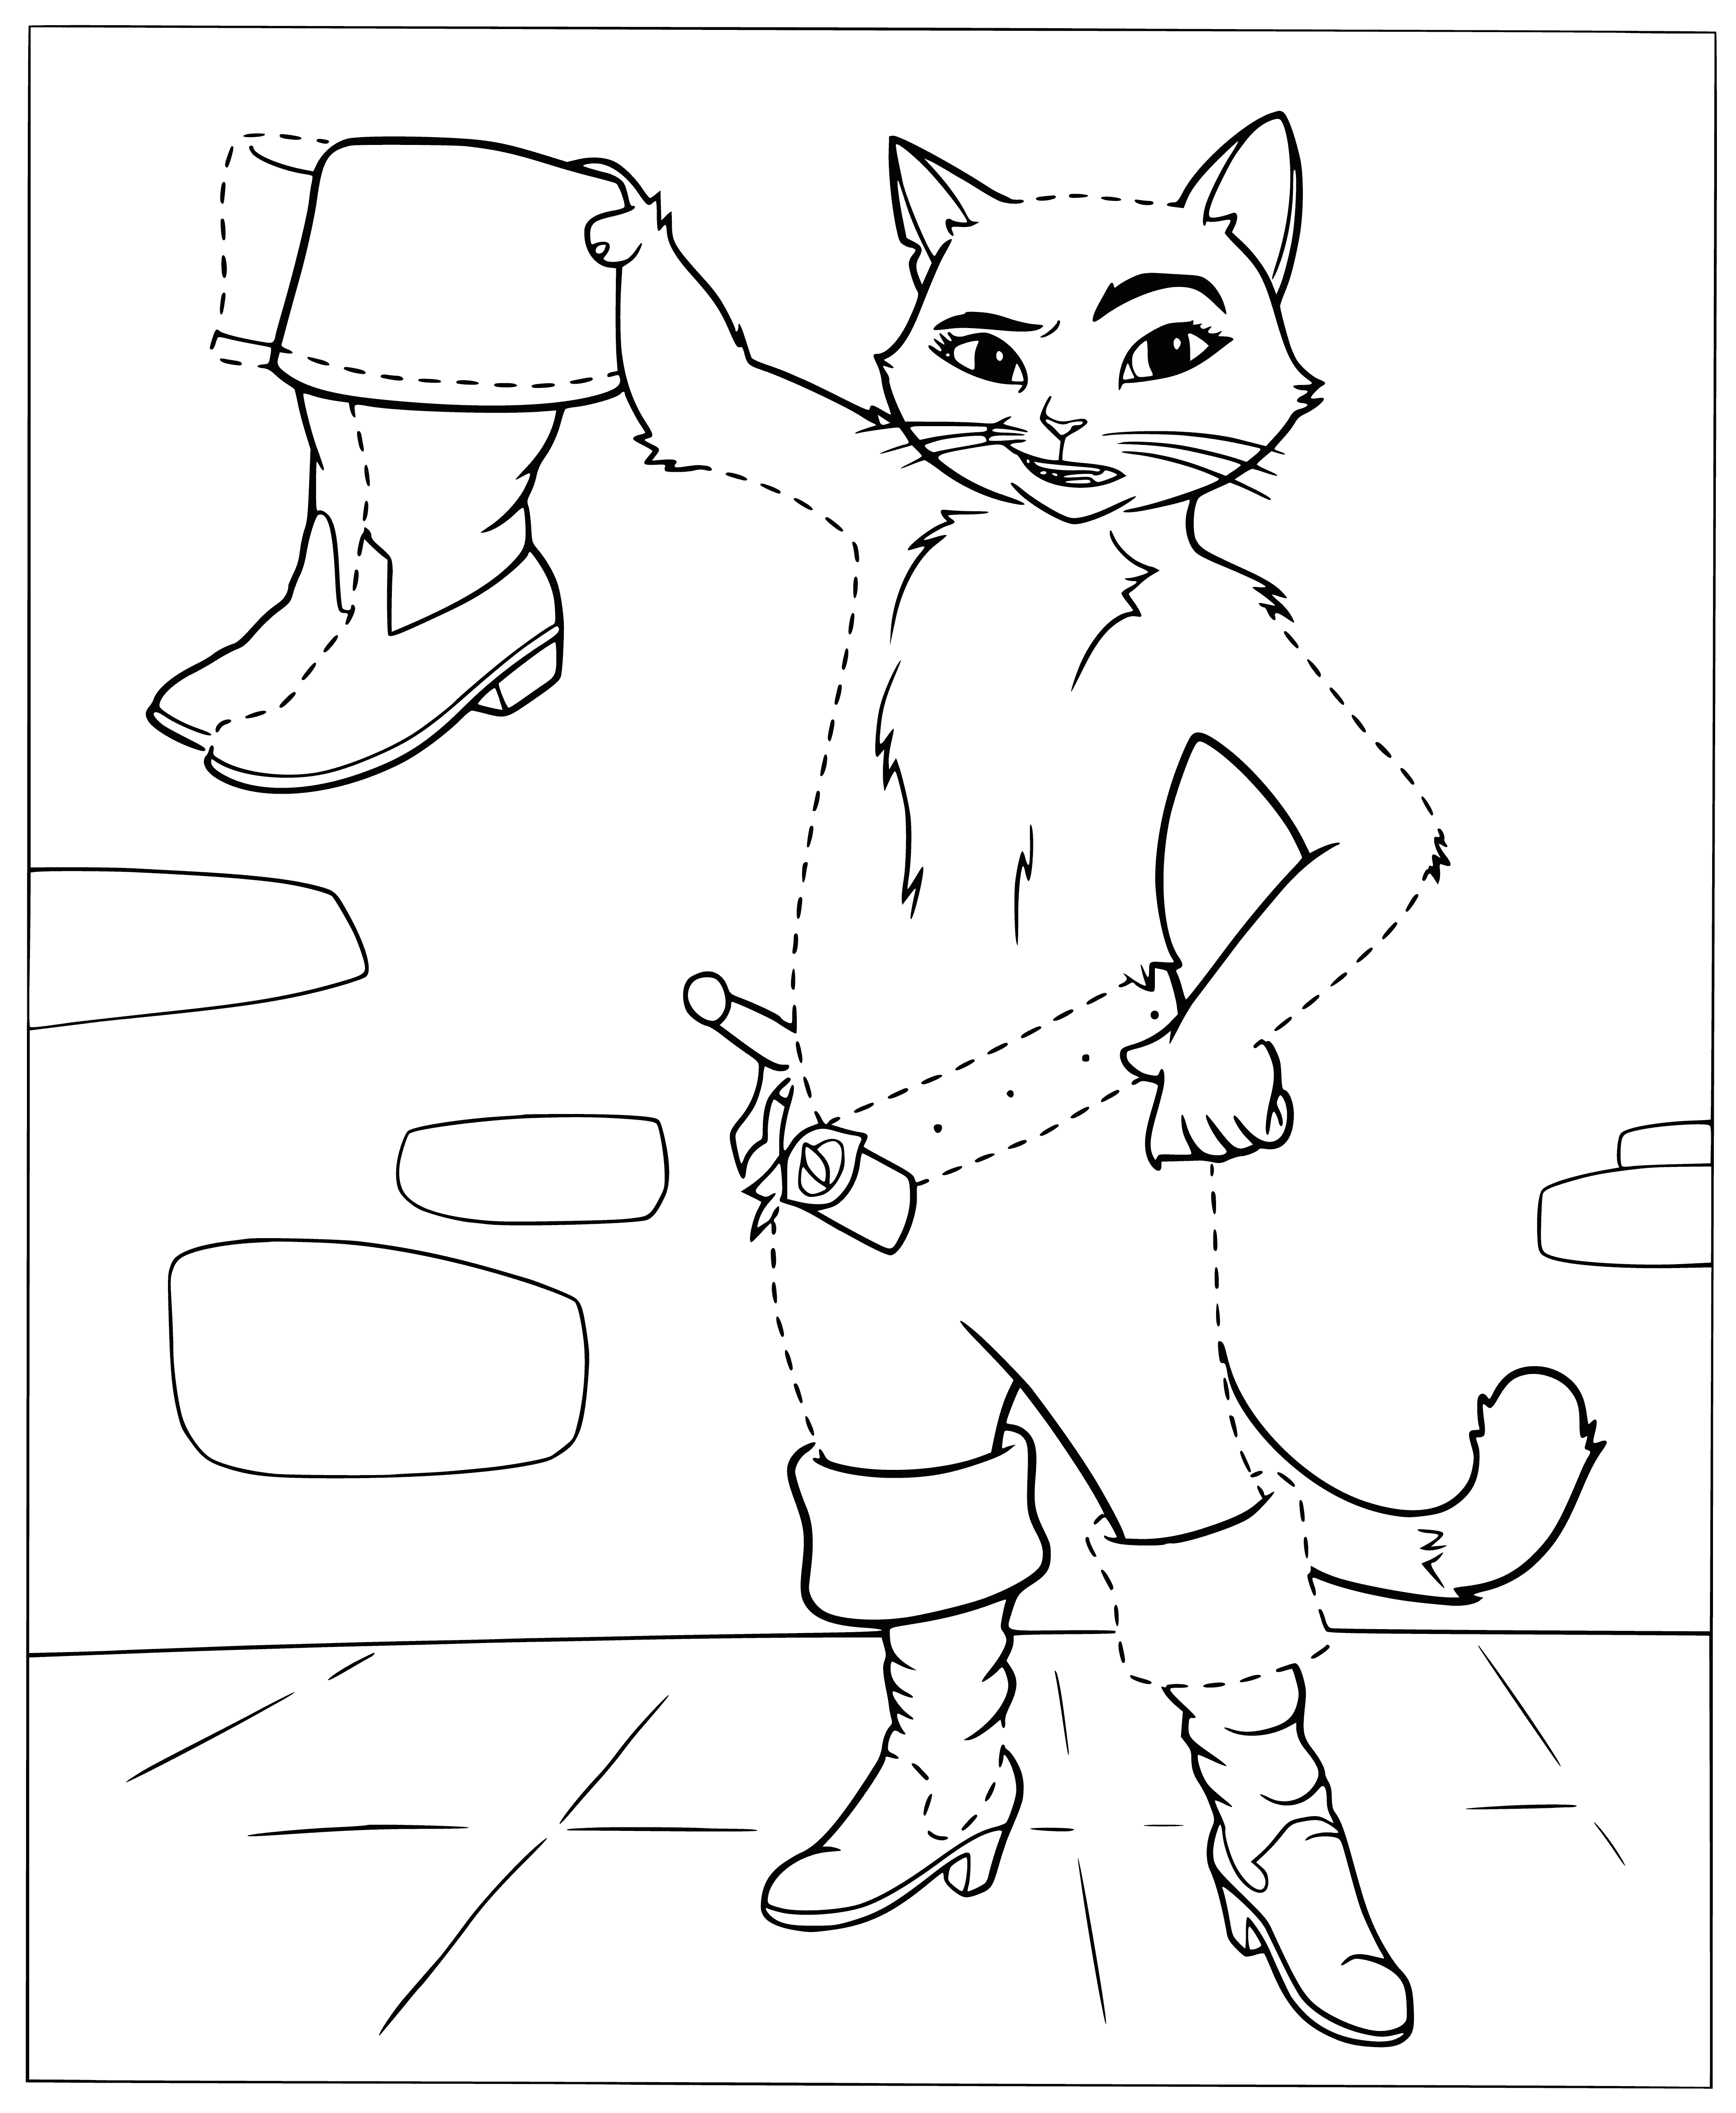 coloring page: Cat in boots stands in a green field w/ tree & castle in bg; gray & white w/ large round head & blue eyes; long tail & brown boots.